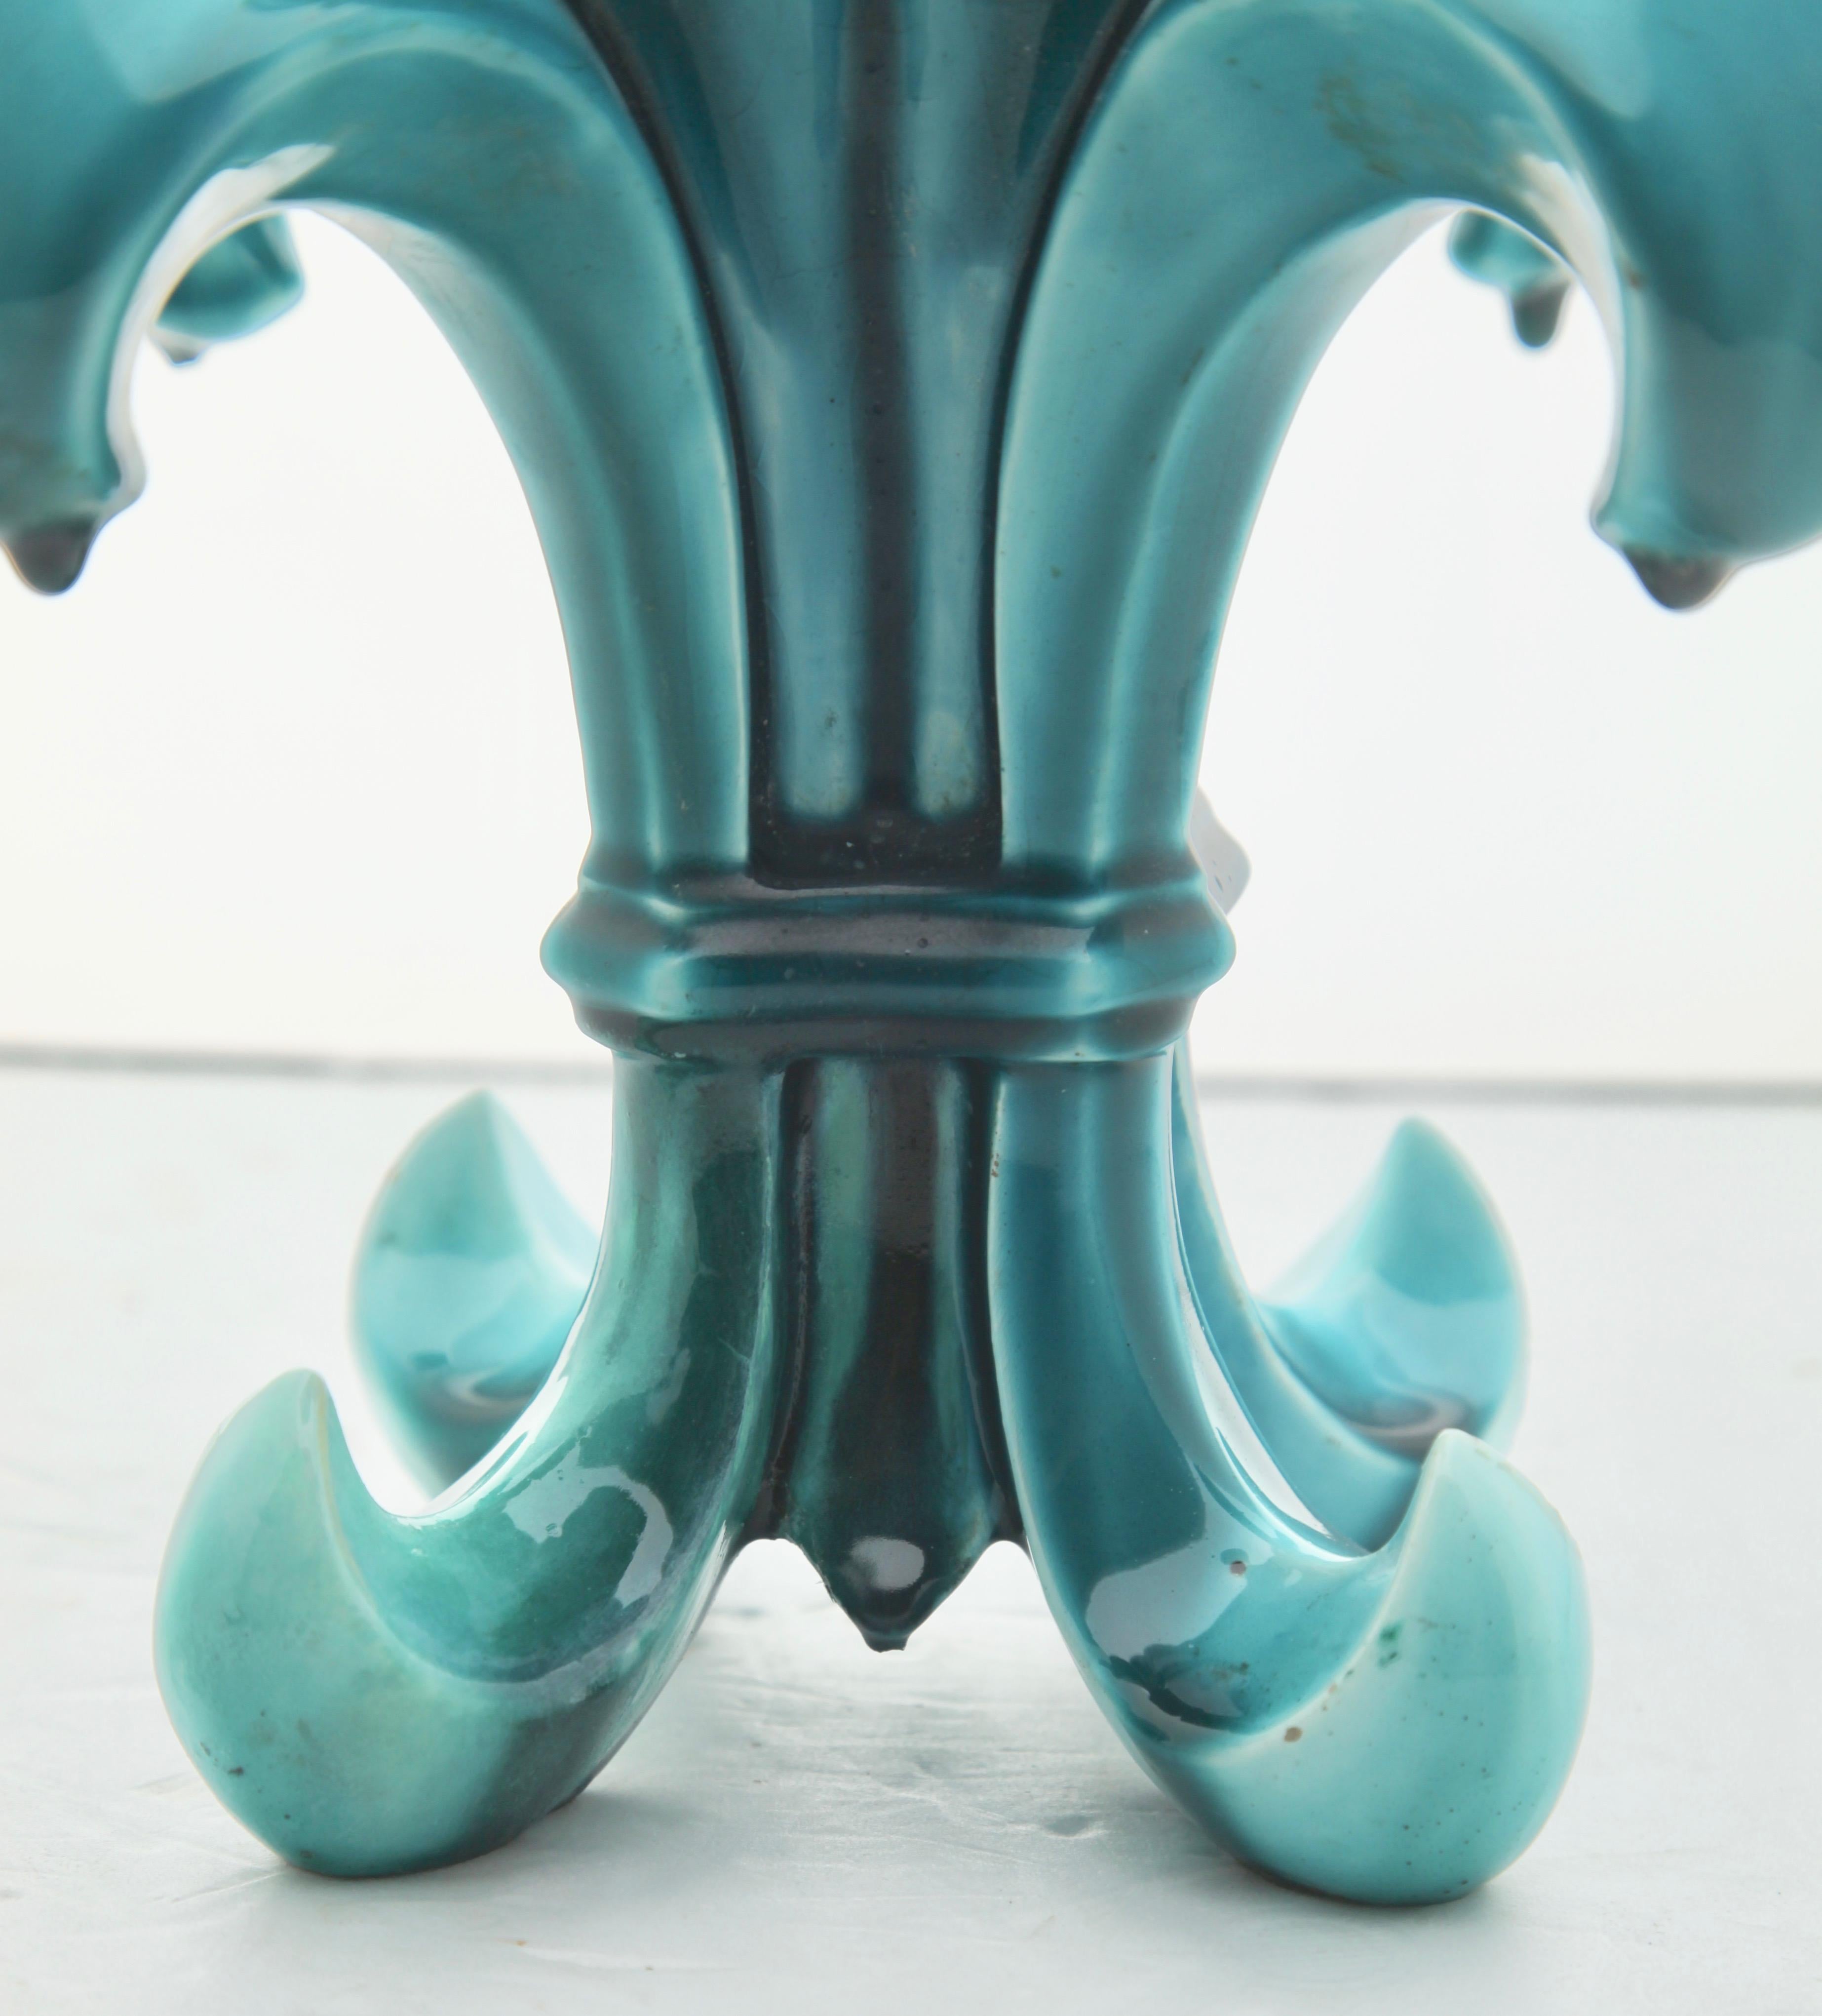 Art Nouveau turquoise Majolica Fleur Lys double by Jerome Massier & Fils at Vallauris
This stylish piece is an early example by a renowned maker, showing the main inspirations of Art Nouveau, applying curved, organic and asymmetrical design-elements